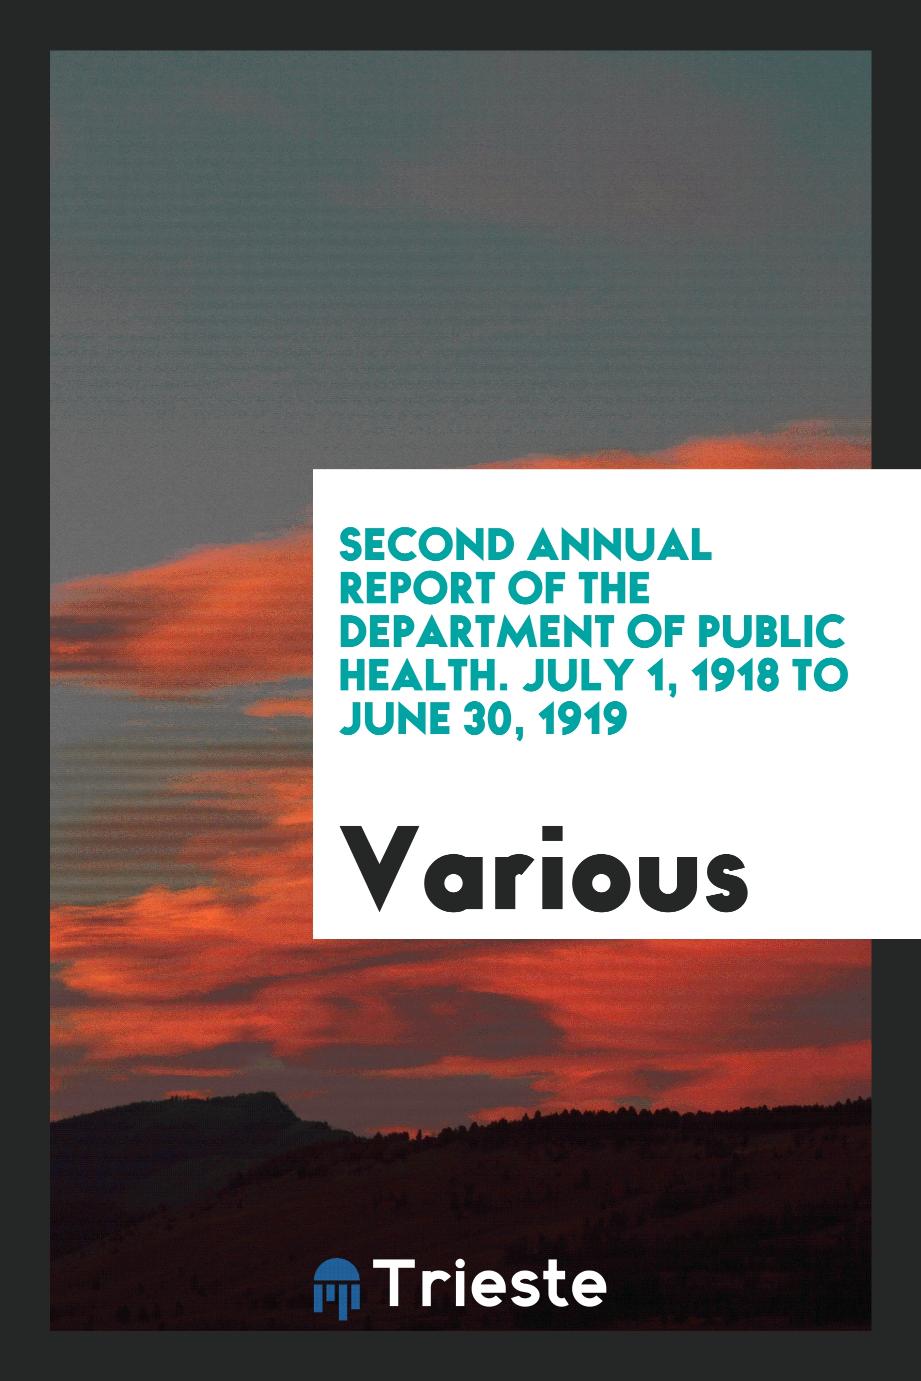 Second Annual Report of the Department of Public Health. July 1, 1918 to June 30, 1919